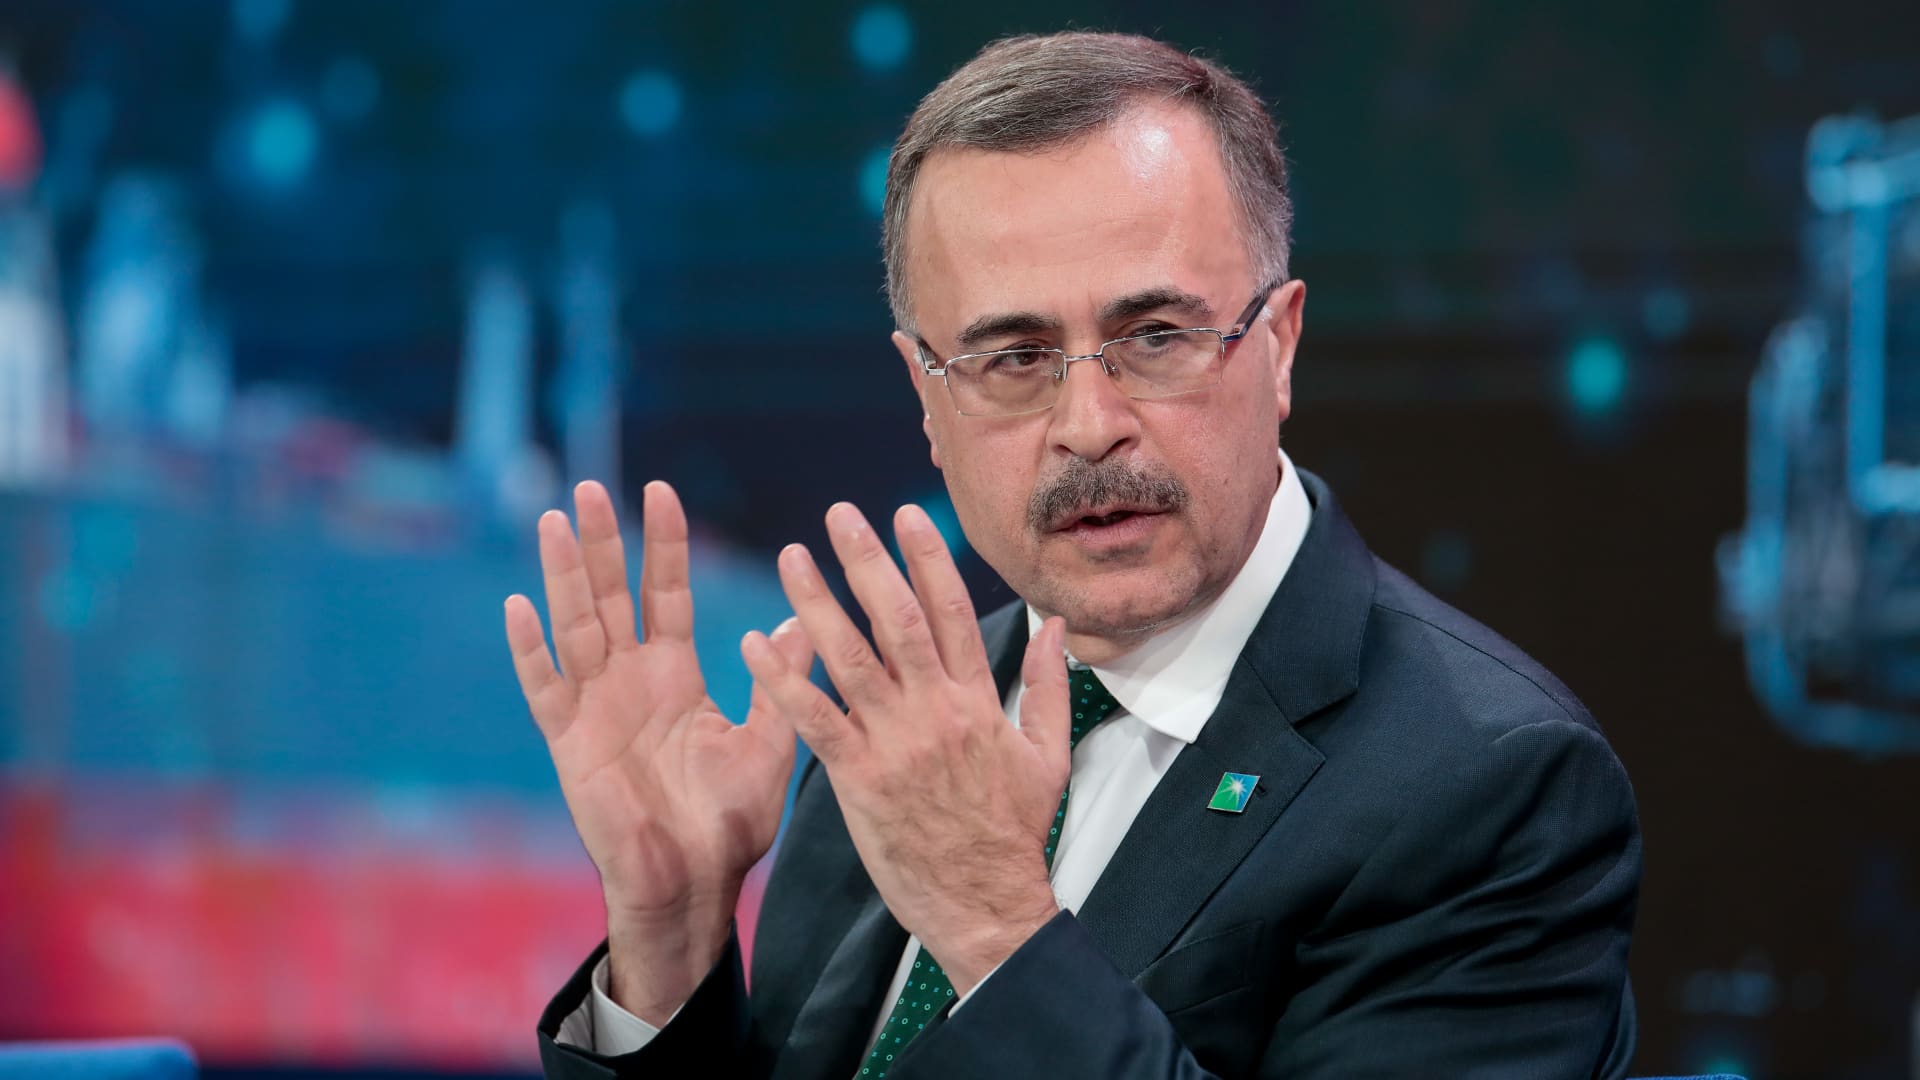 Oil giant Aramco says windfall taxes ‘not helpful’ and could stifle decarbonization